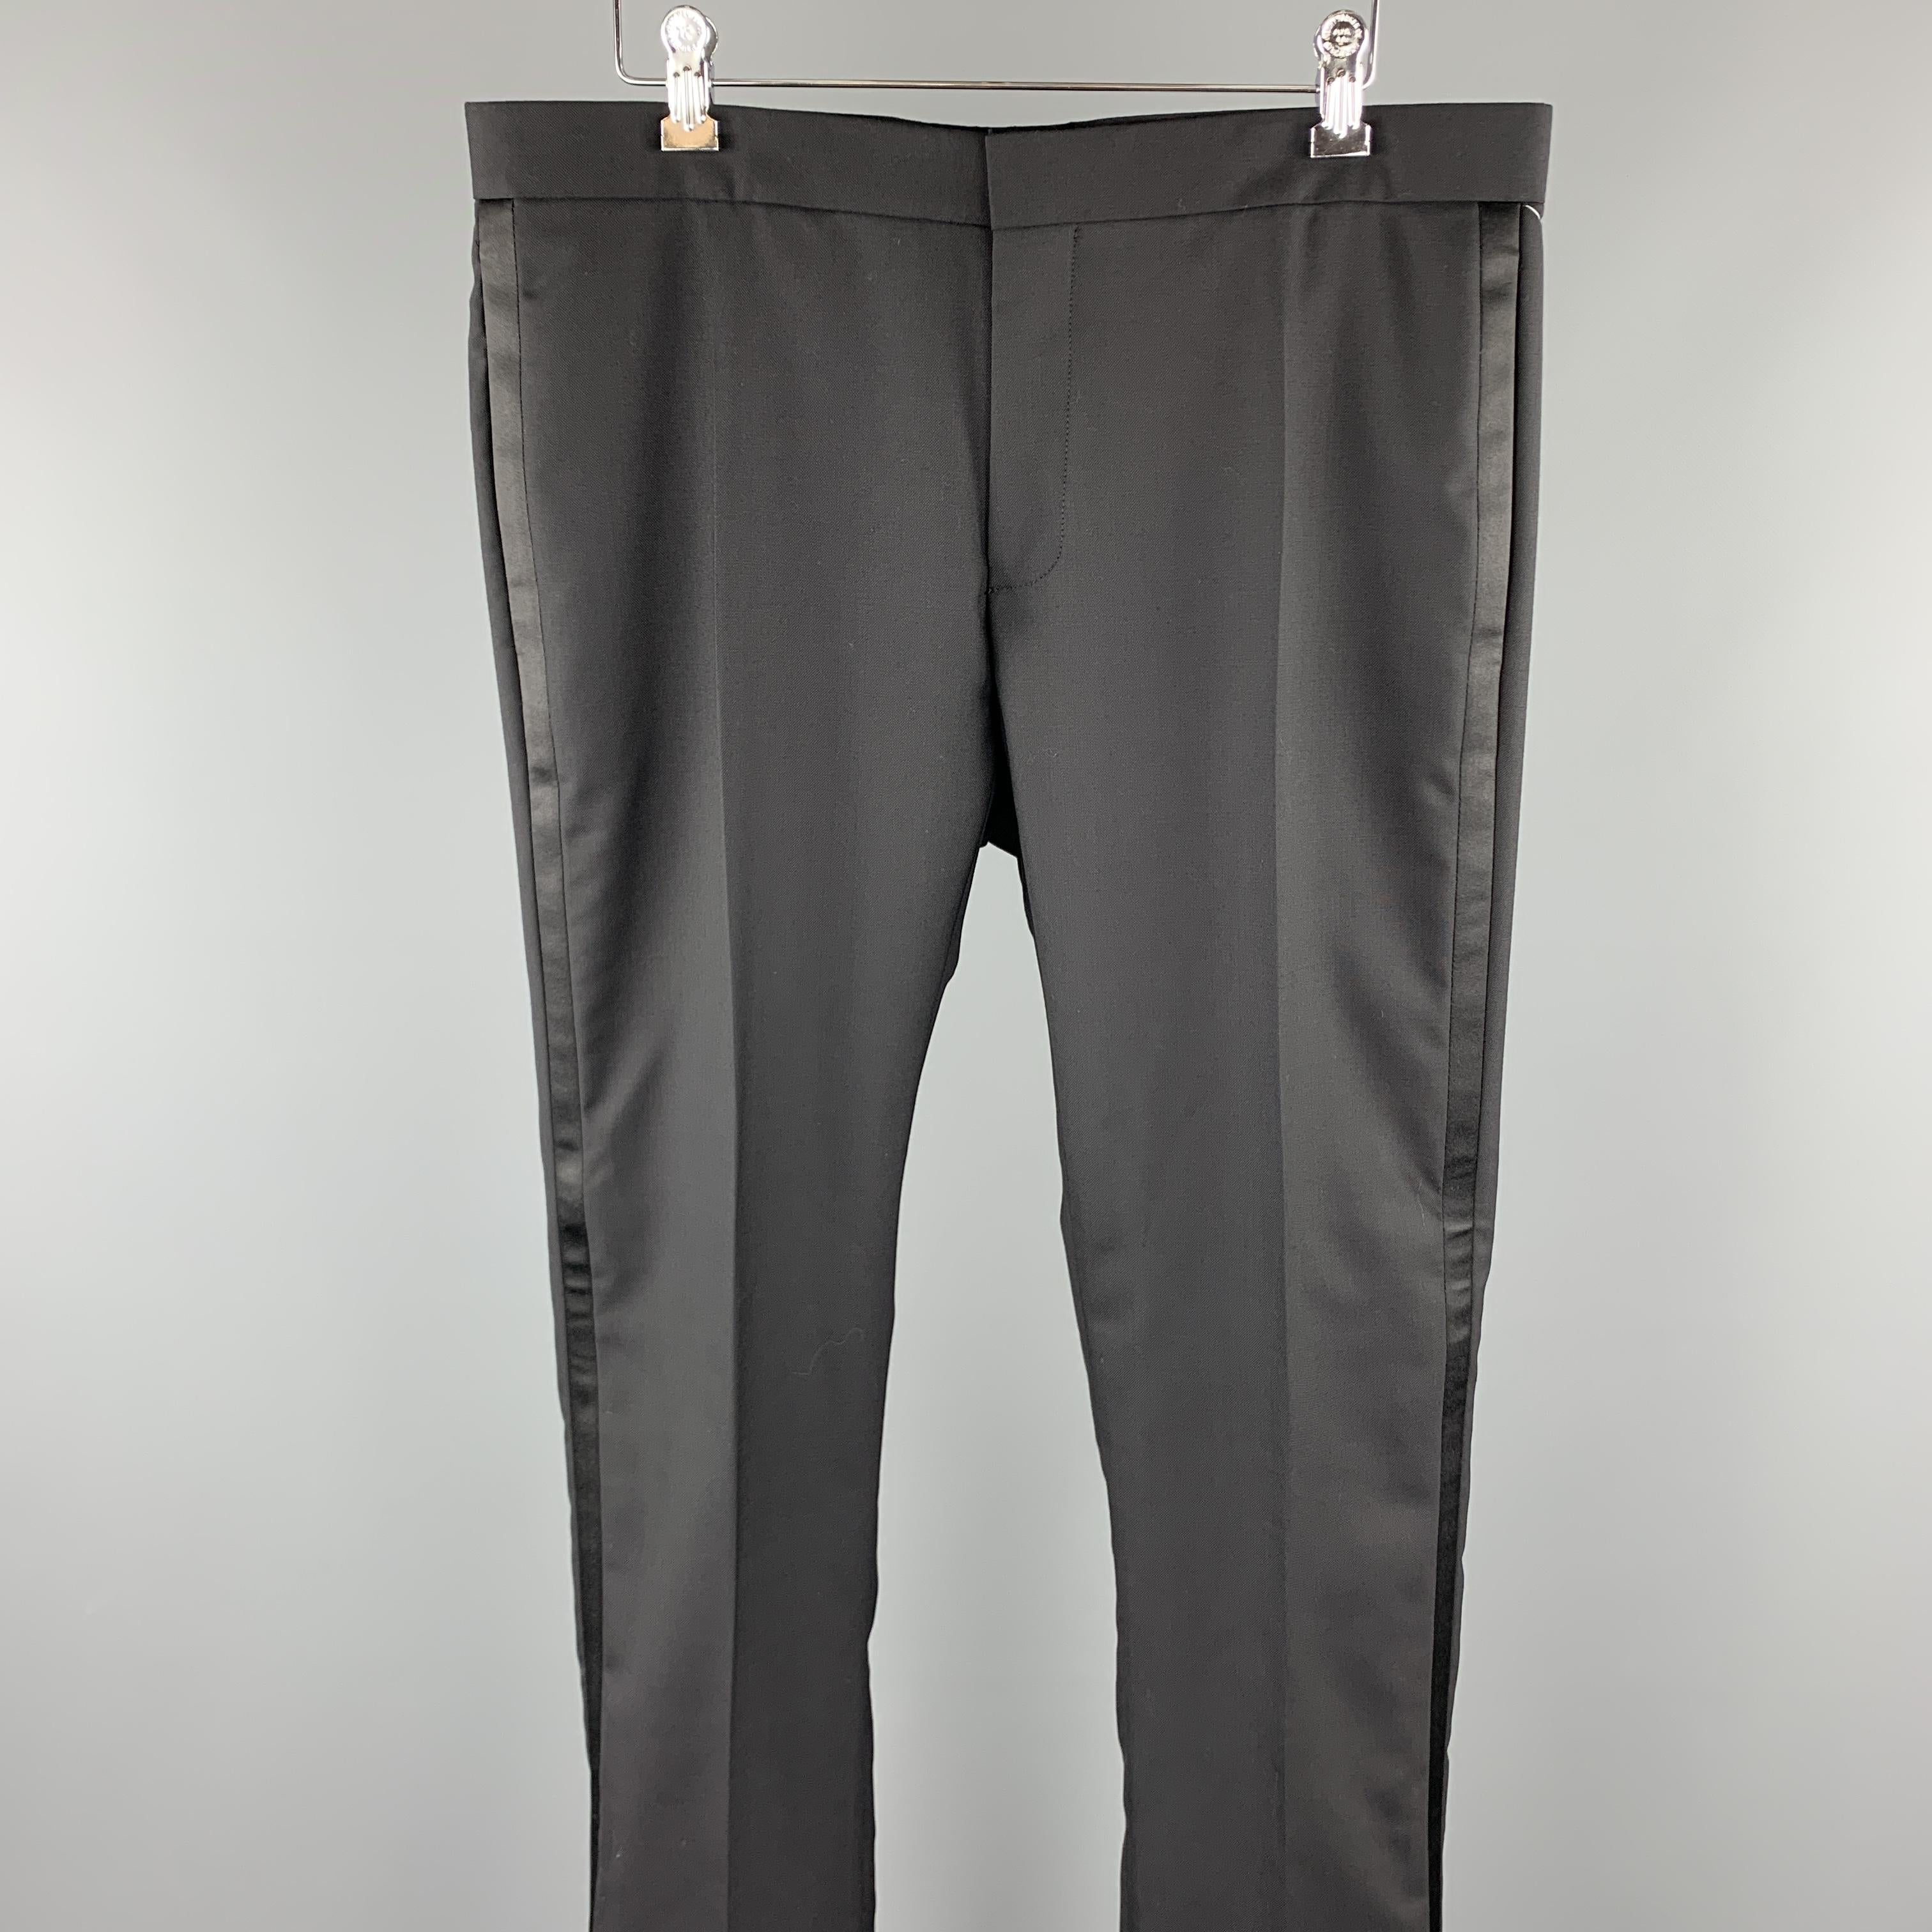 DIOR HOMME tuxedo dress pants comes in a black wool featuring a flat front style, front tab, and a zip fly closure. Made in Italy.

Excellent Pre-Owned Condition.
Marked: IT 50

Measurements:

Waist: 34 in. 
Rise: 8.5 in. 
Inseam: 33 in. 